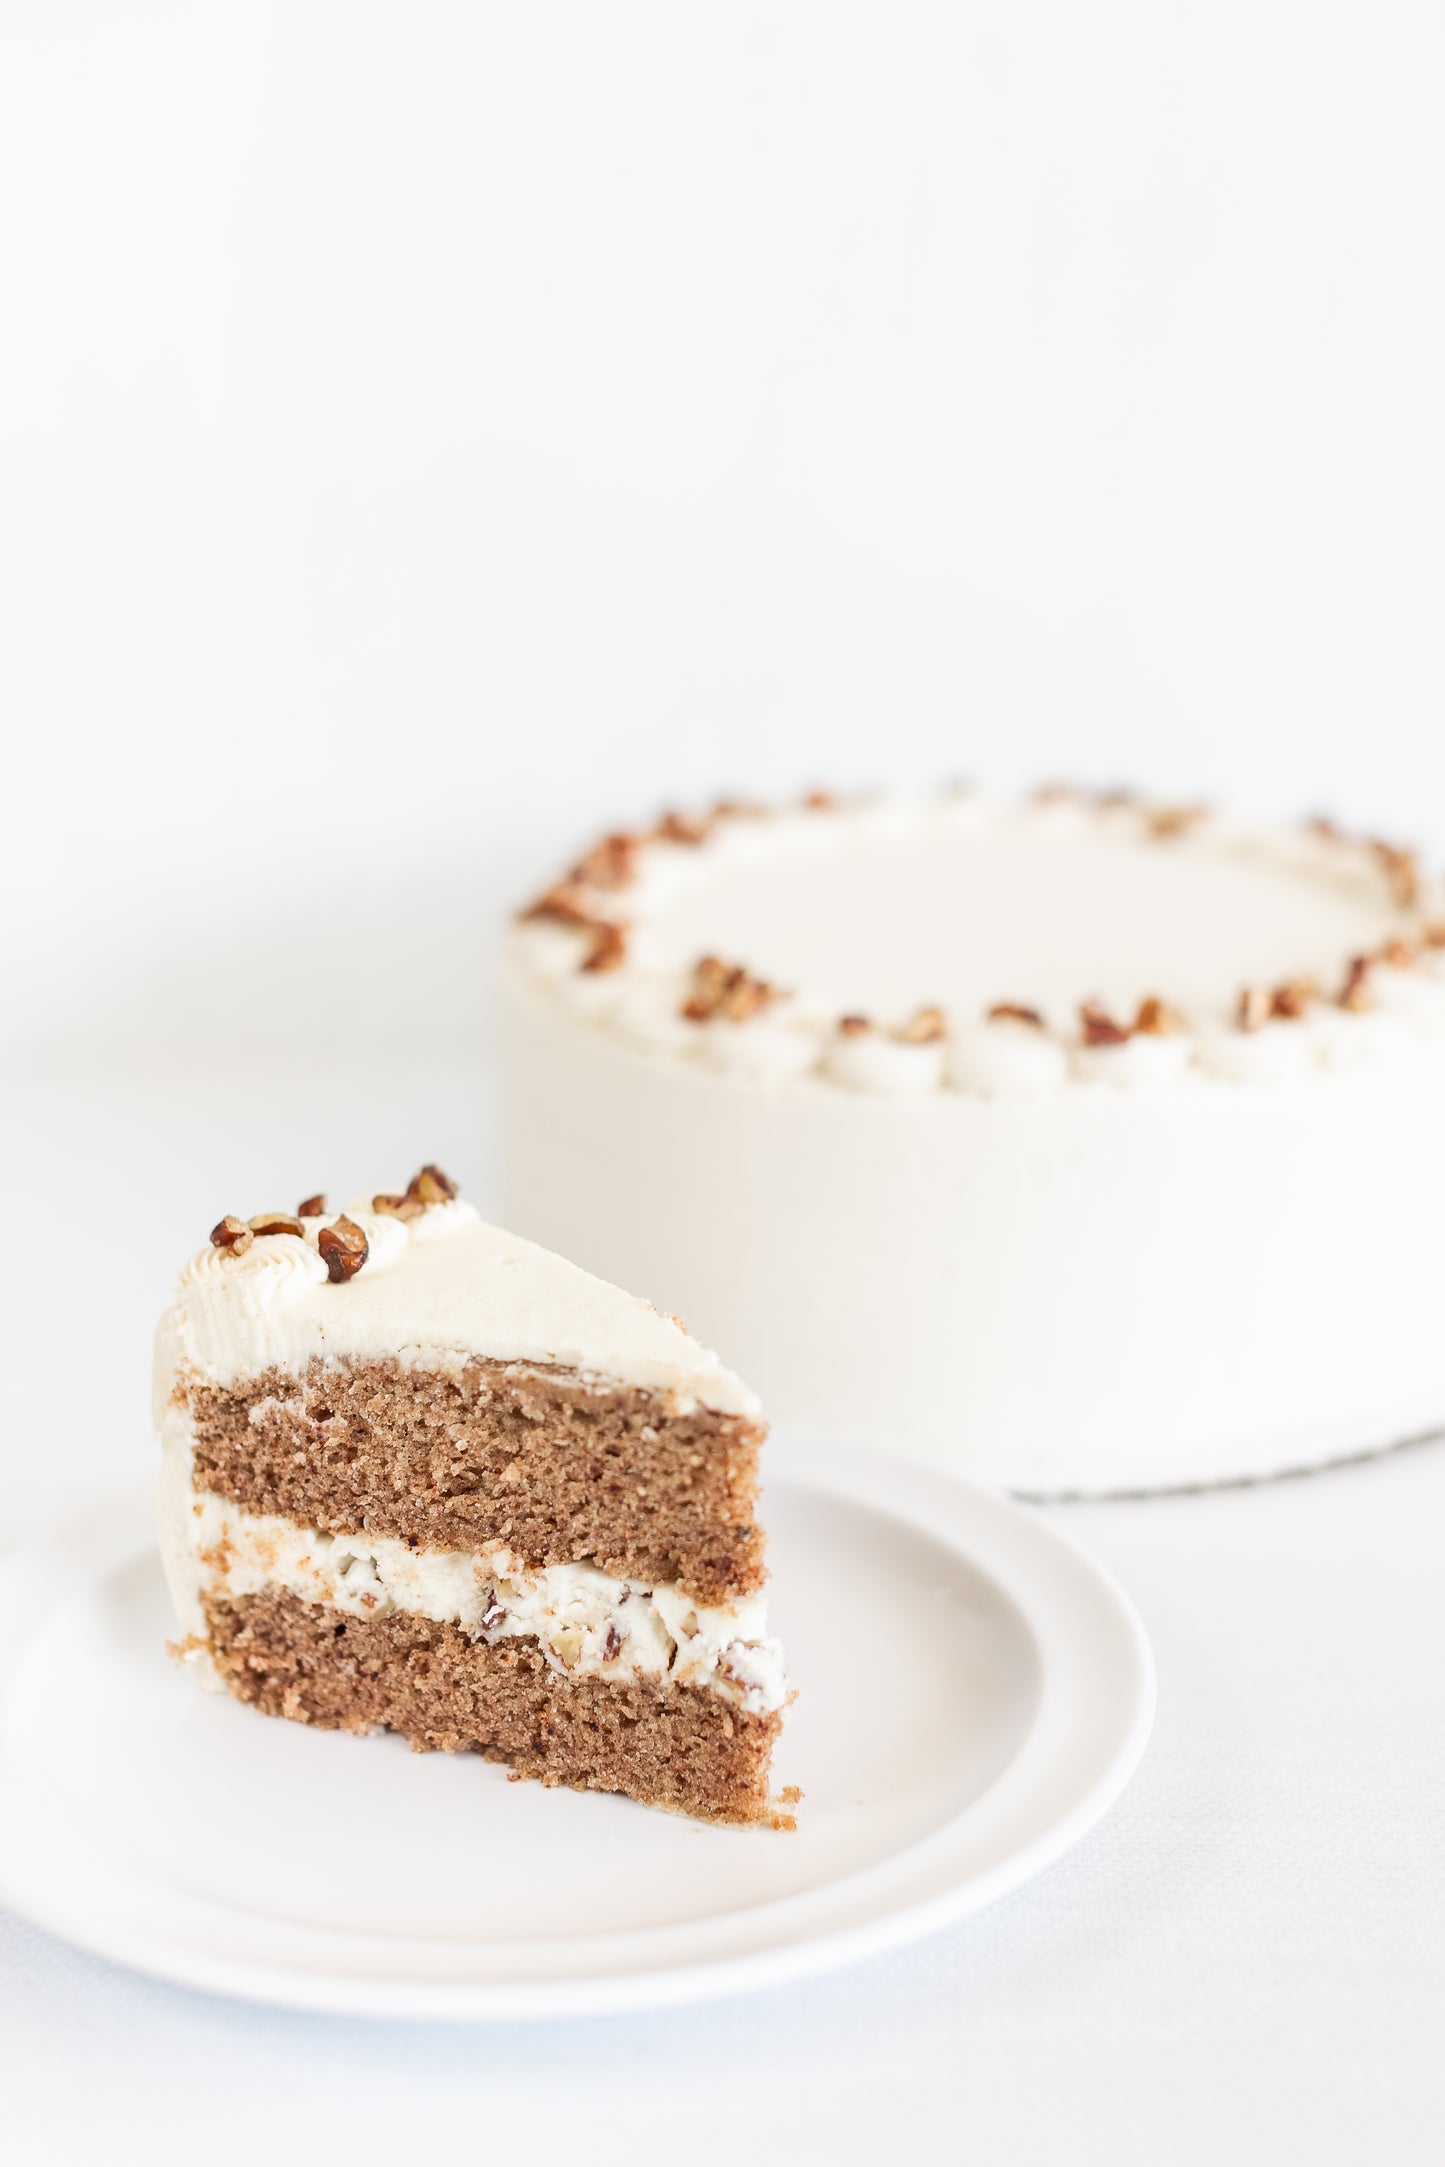 #Cake of the Month - Spiced Maple Pecan